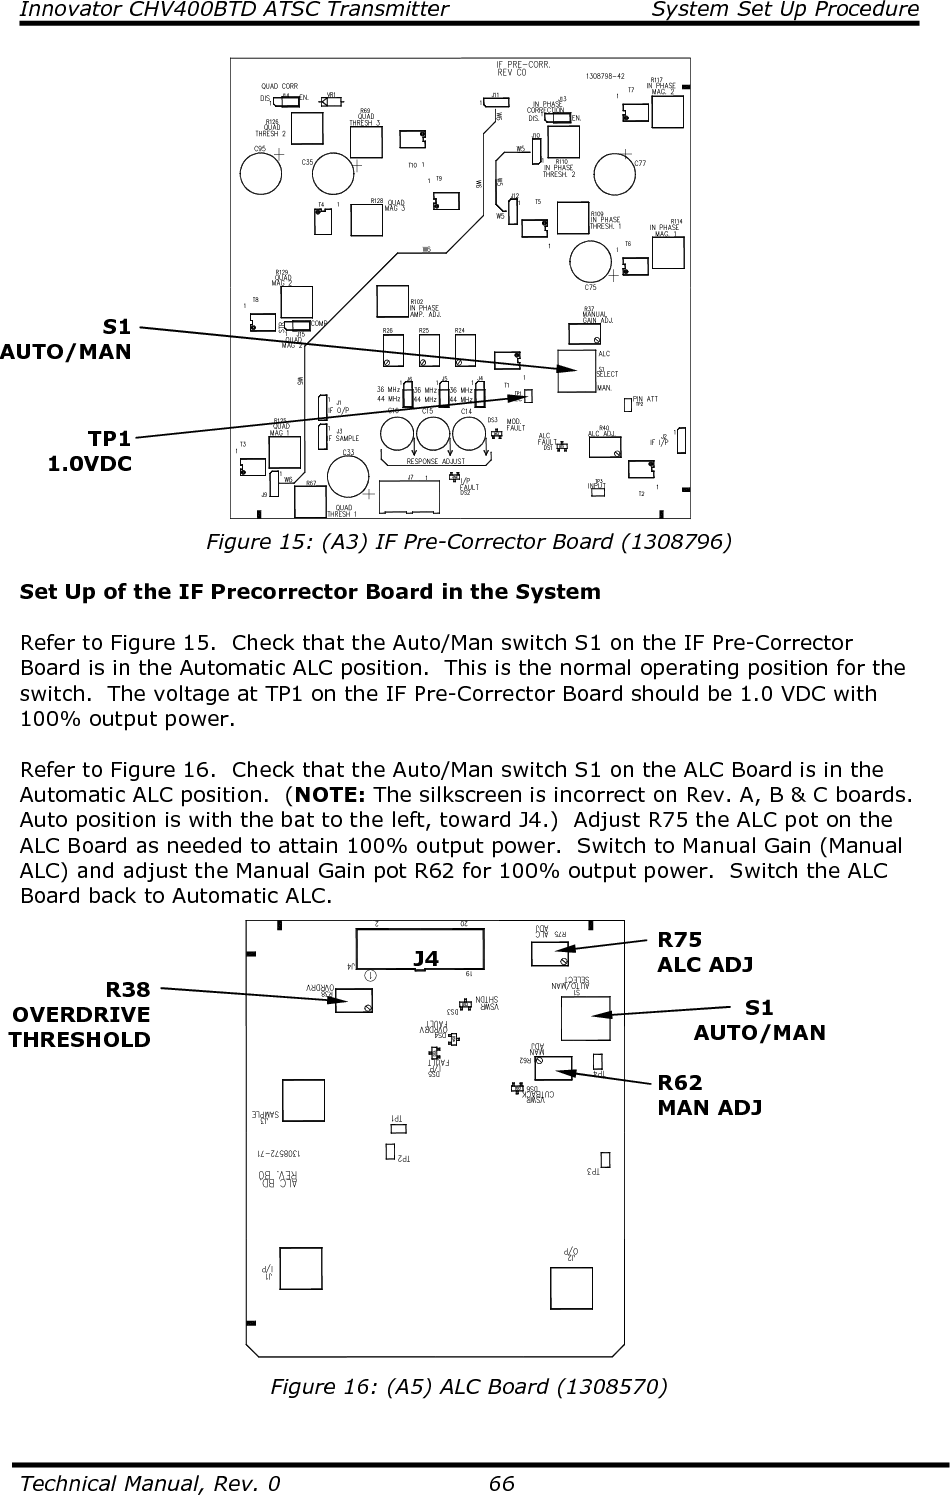 Innovator CHV400BTD ATSC Transmitter  System Set Up Procedure  Technical Manual, Rev. 0    66  Figure 15: (A3) IF Pre-Corrector Board (1308796)  Set Up of the IF Precorrector Board in the System  Refer to Figure 15.  Check that the Auto/Man switch S1 on the IF Pre-Corrector Board is in the Automatic ALC position.  This is the normal operating position for the switch.  The voltage at TP1 on the IF Pre-Corrector Board should be 1.0 VDC with 100% output power.  Refer to Figure 16.  Check that the Auto/Man switch S1 on the ALC Board is in the Automatic ALC position.  (NOTE: The silkscreen is incorrect on Rev. A, B &amp; C boards.  Auto position is with the bat to the left, toward J4.)  Adjust R75 the ALC pot on the ALC Board as needed to attain 100% output power.  Switch to Manual Gain (Manual ALC) and adjust the Manual Gain pot R62 for 100% output power.  Switch the ALC Board back to Automatic ALC.   Figure 16: (A5) ALC Board (1308570) S1 AUTO/MAN S1 AUTO/MAN TP1 1.0VDC J4 R75 ALC ADJ R62 MAN ADJ R38 OVERDRIVE THRESHOLD 